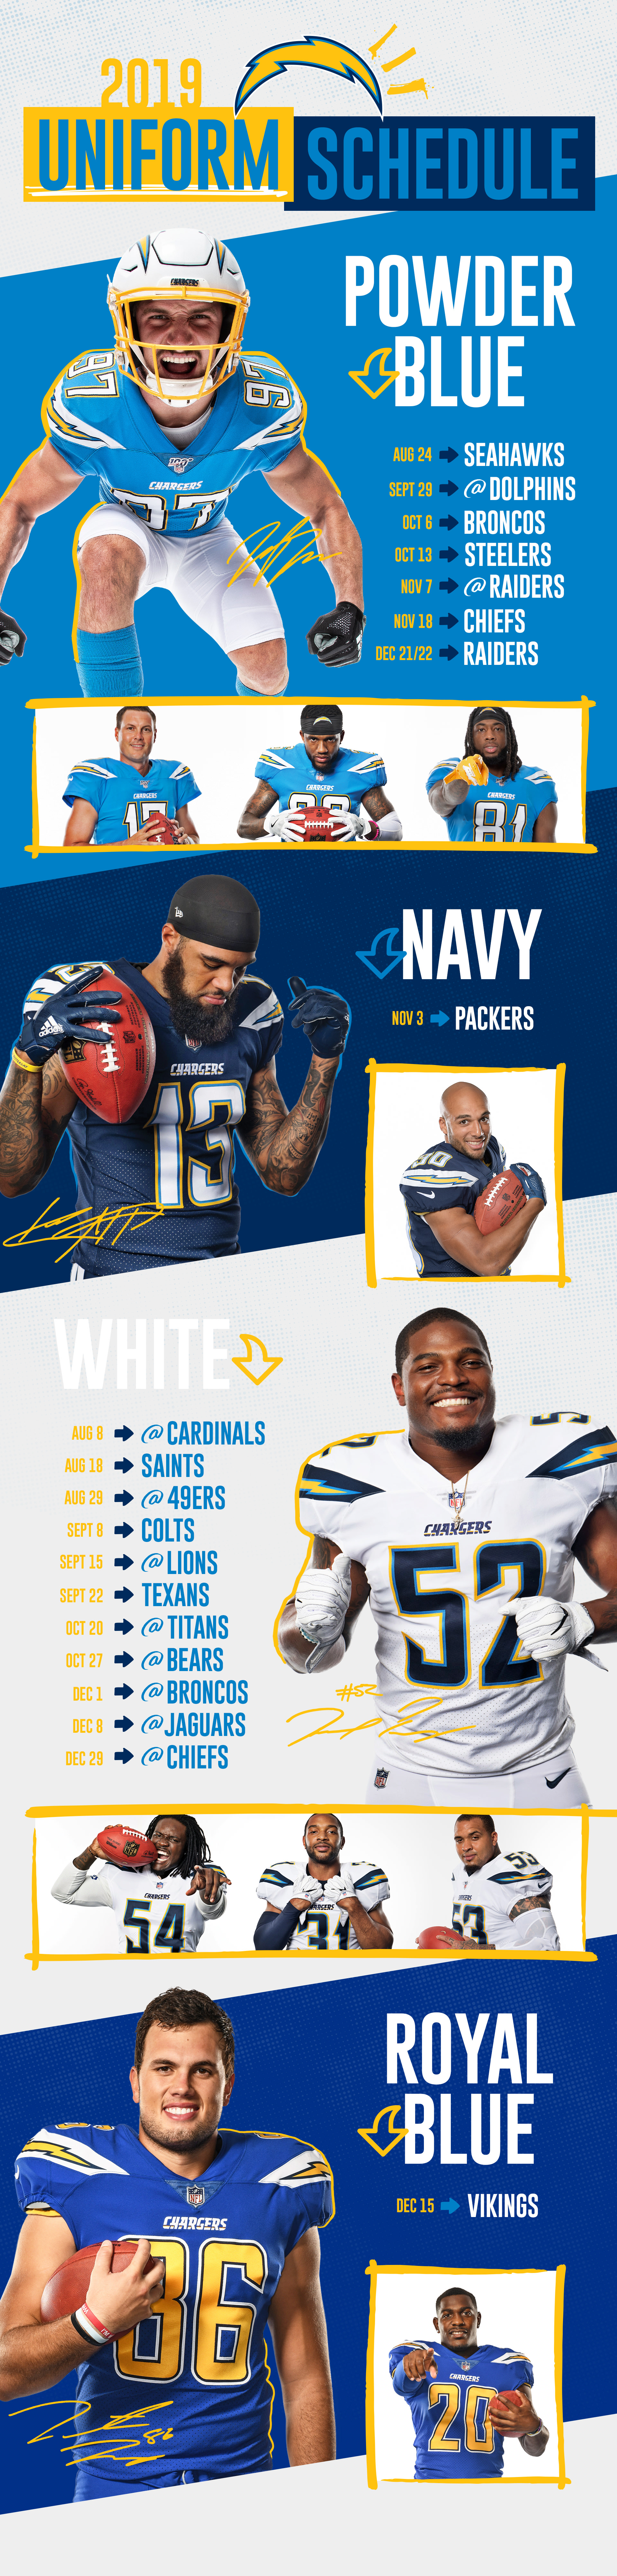 Chargers Official Site | Los Angeles Chargers - chargers.com